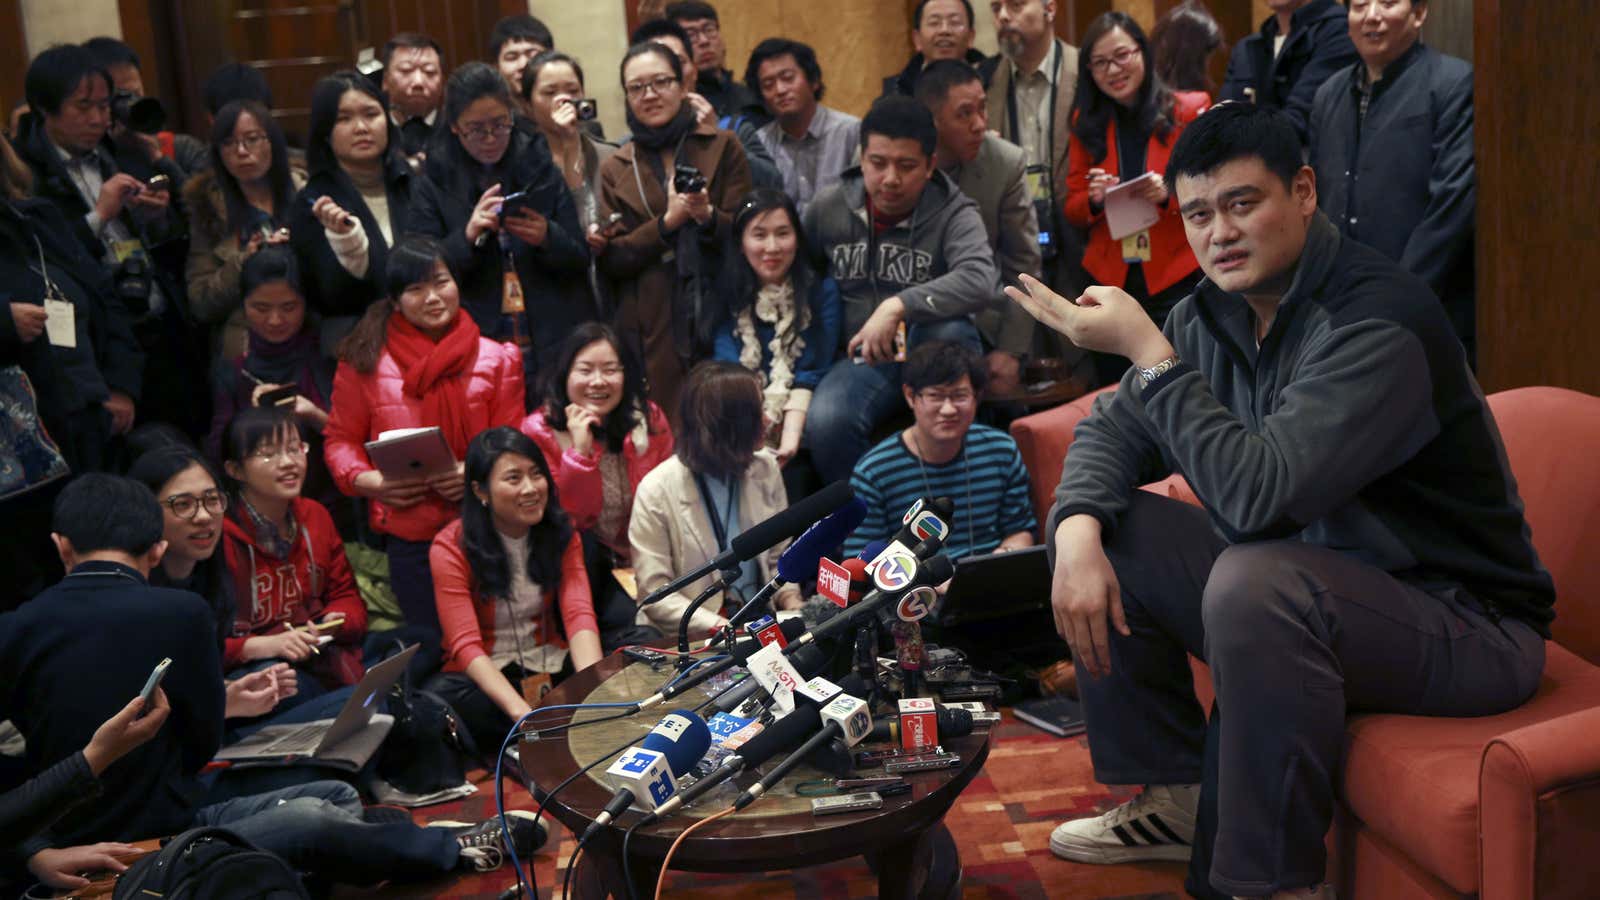 “Isn’t this great?” Basketball player Yao Ming at a government-run press conference.